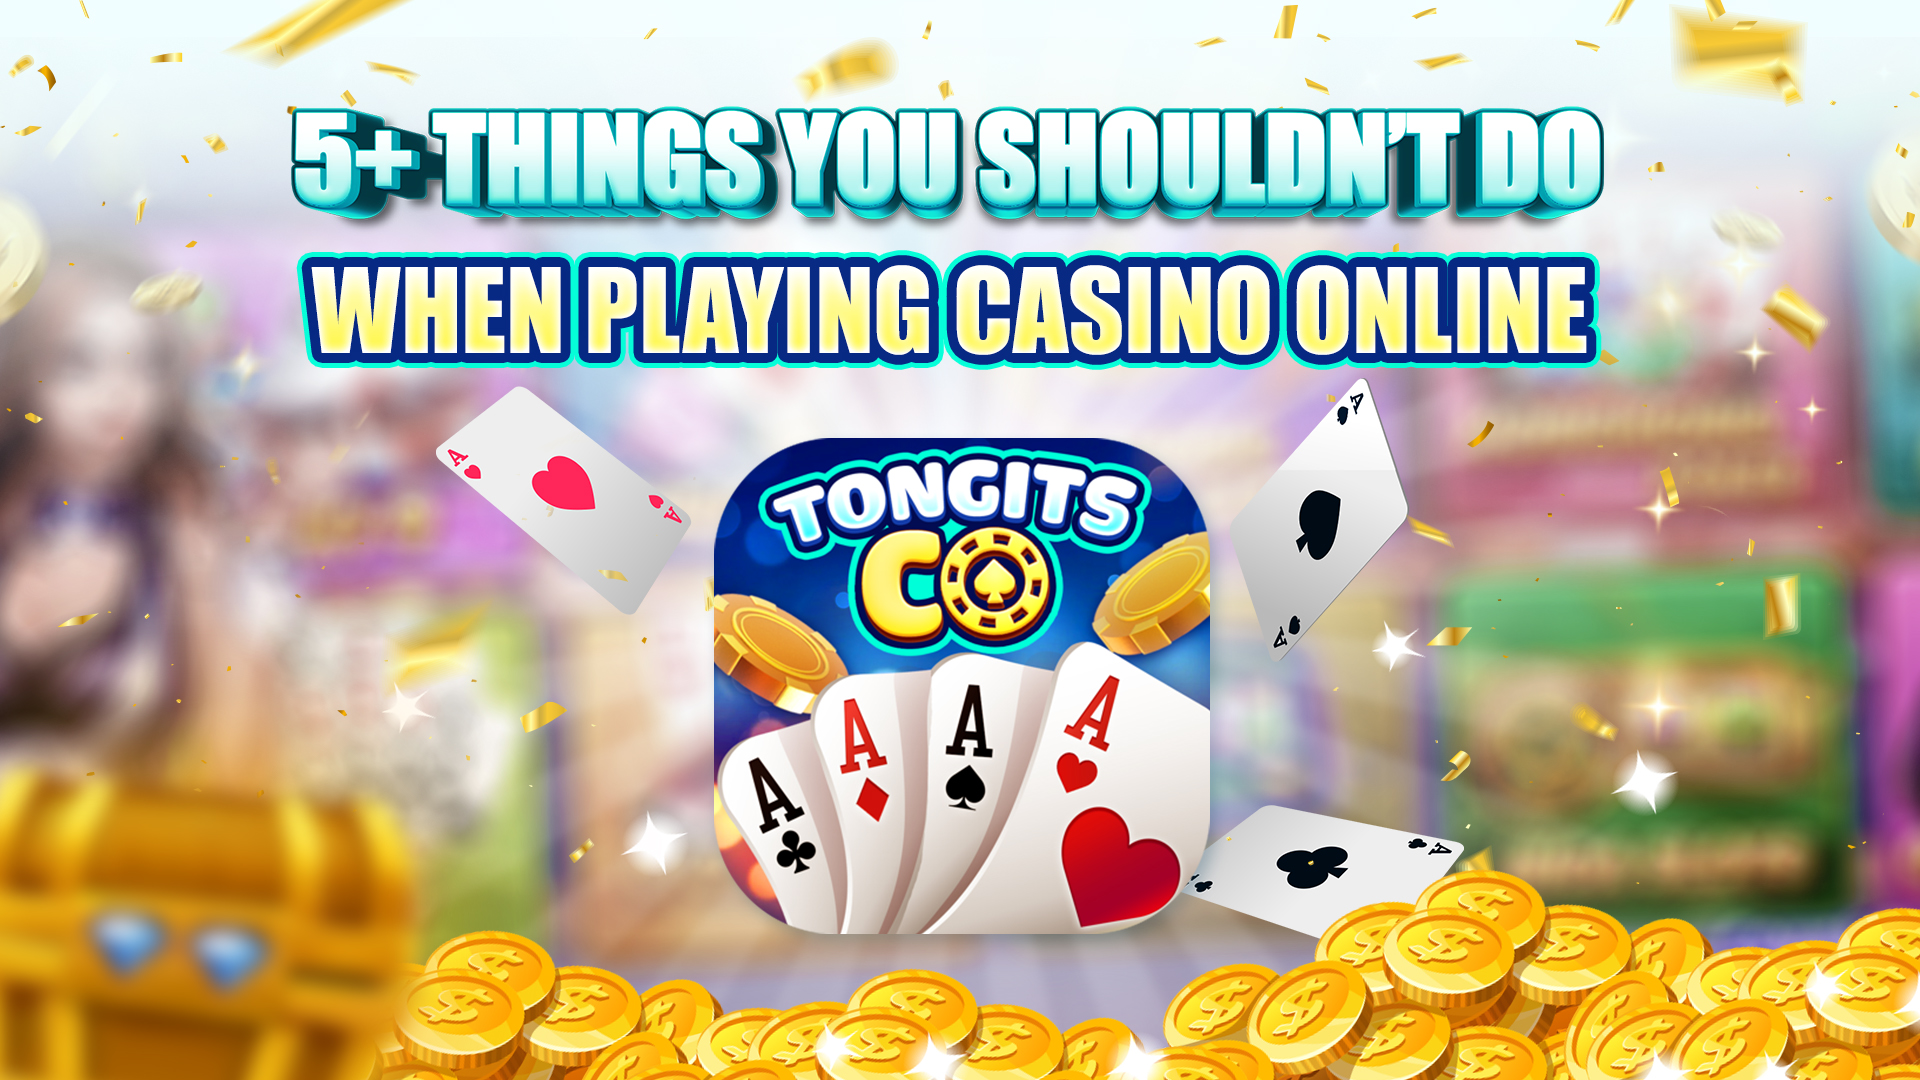 CASINO ONLINE GAMBLING – 5+ things you want to avoid